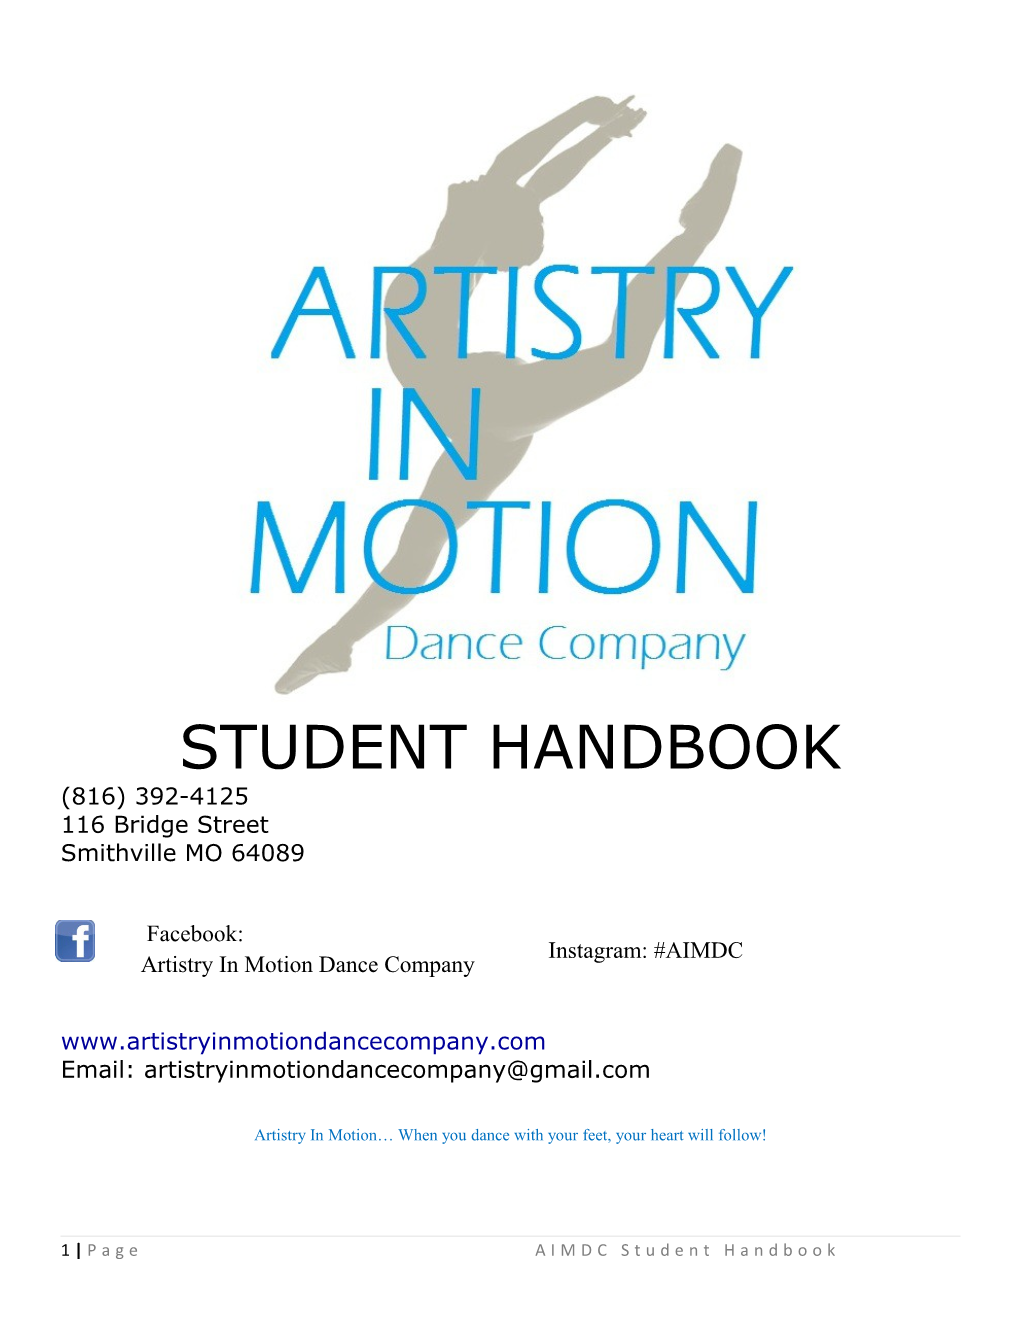 Artistry in Motion Dance Company